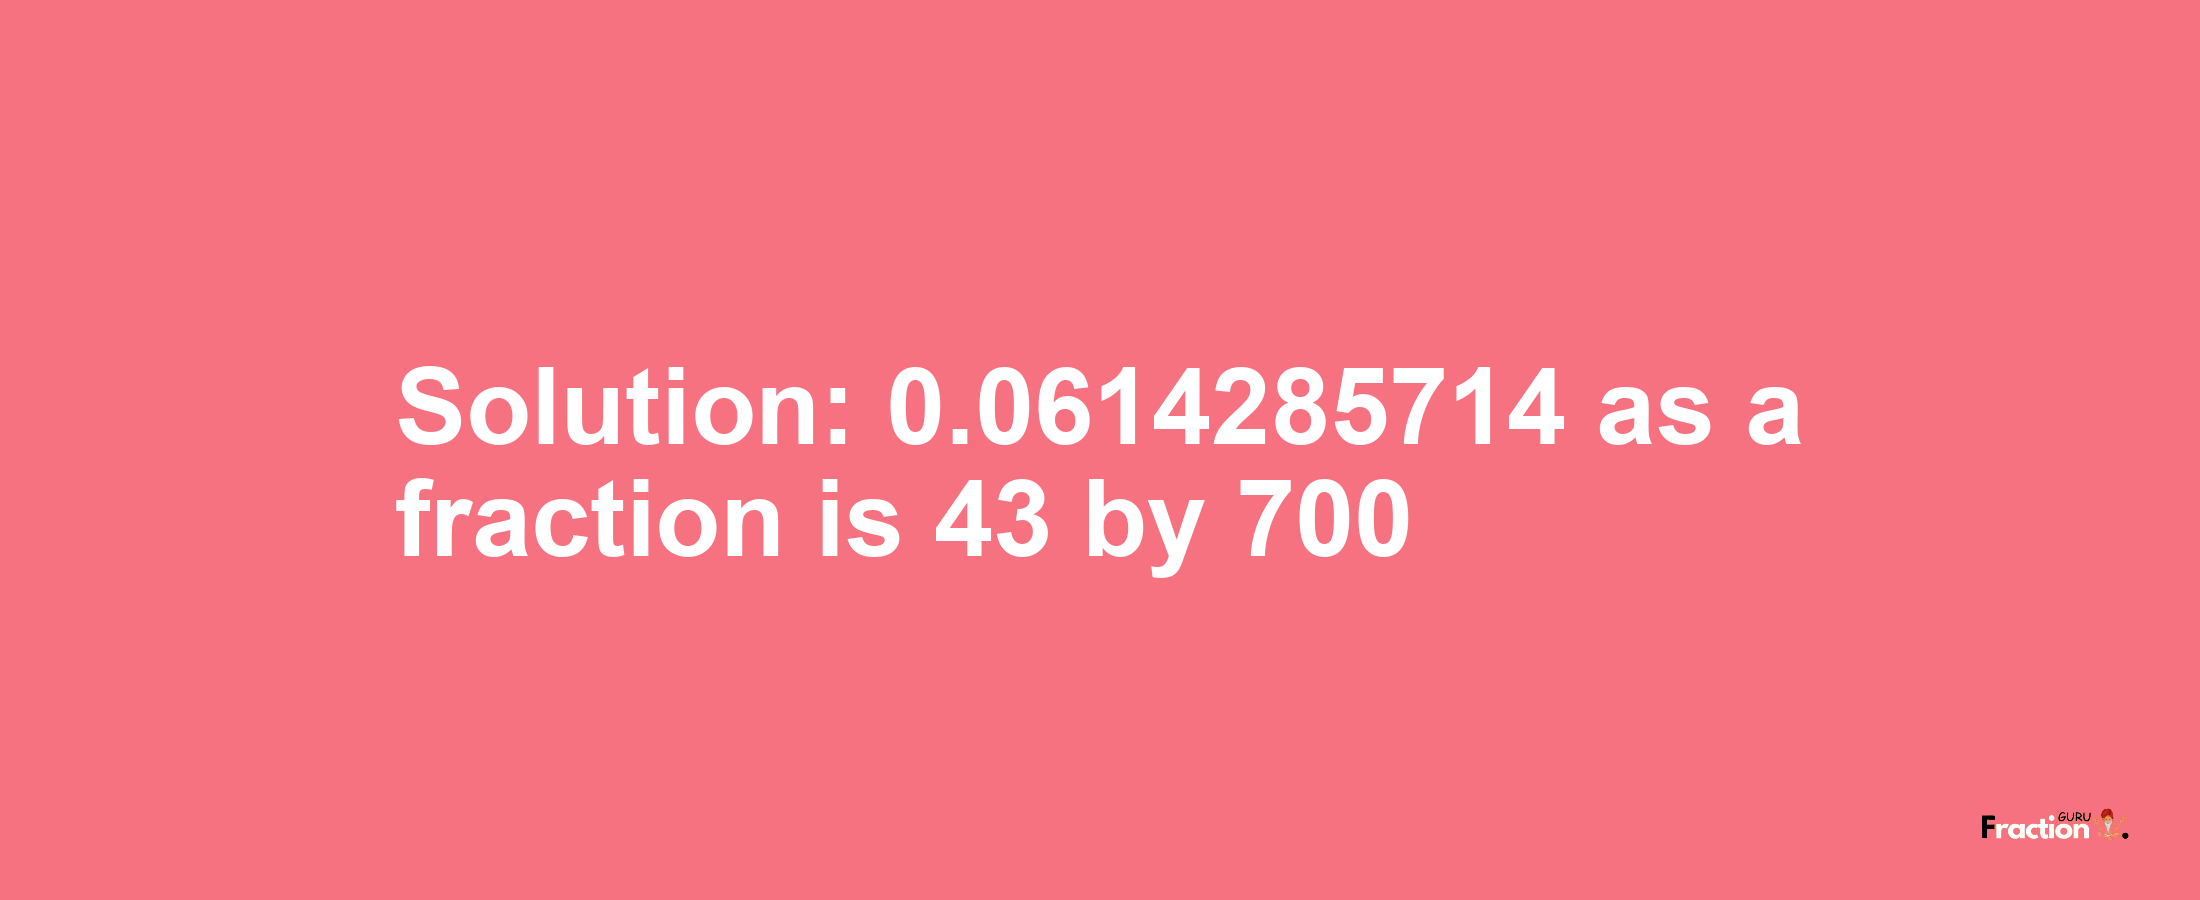 Solution:0.0614285714 as a fraction is 43/700